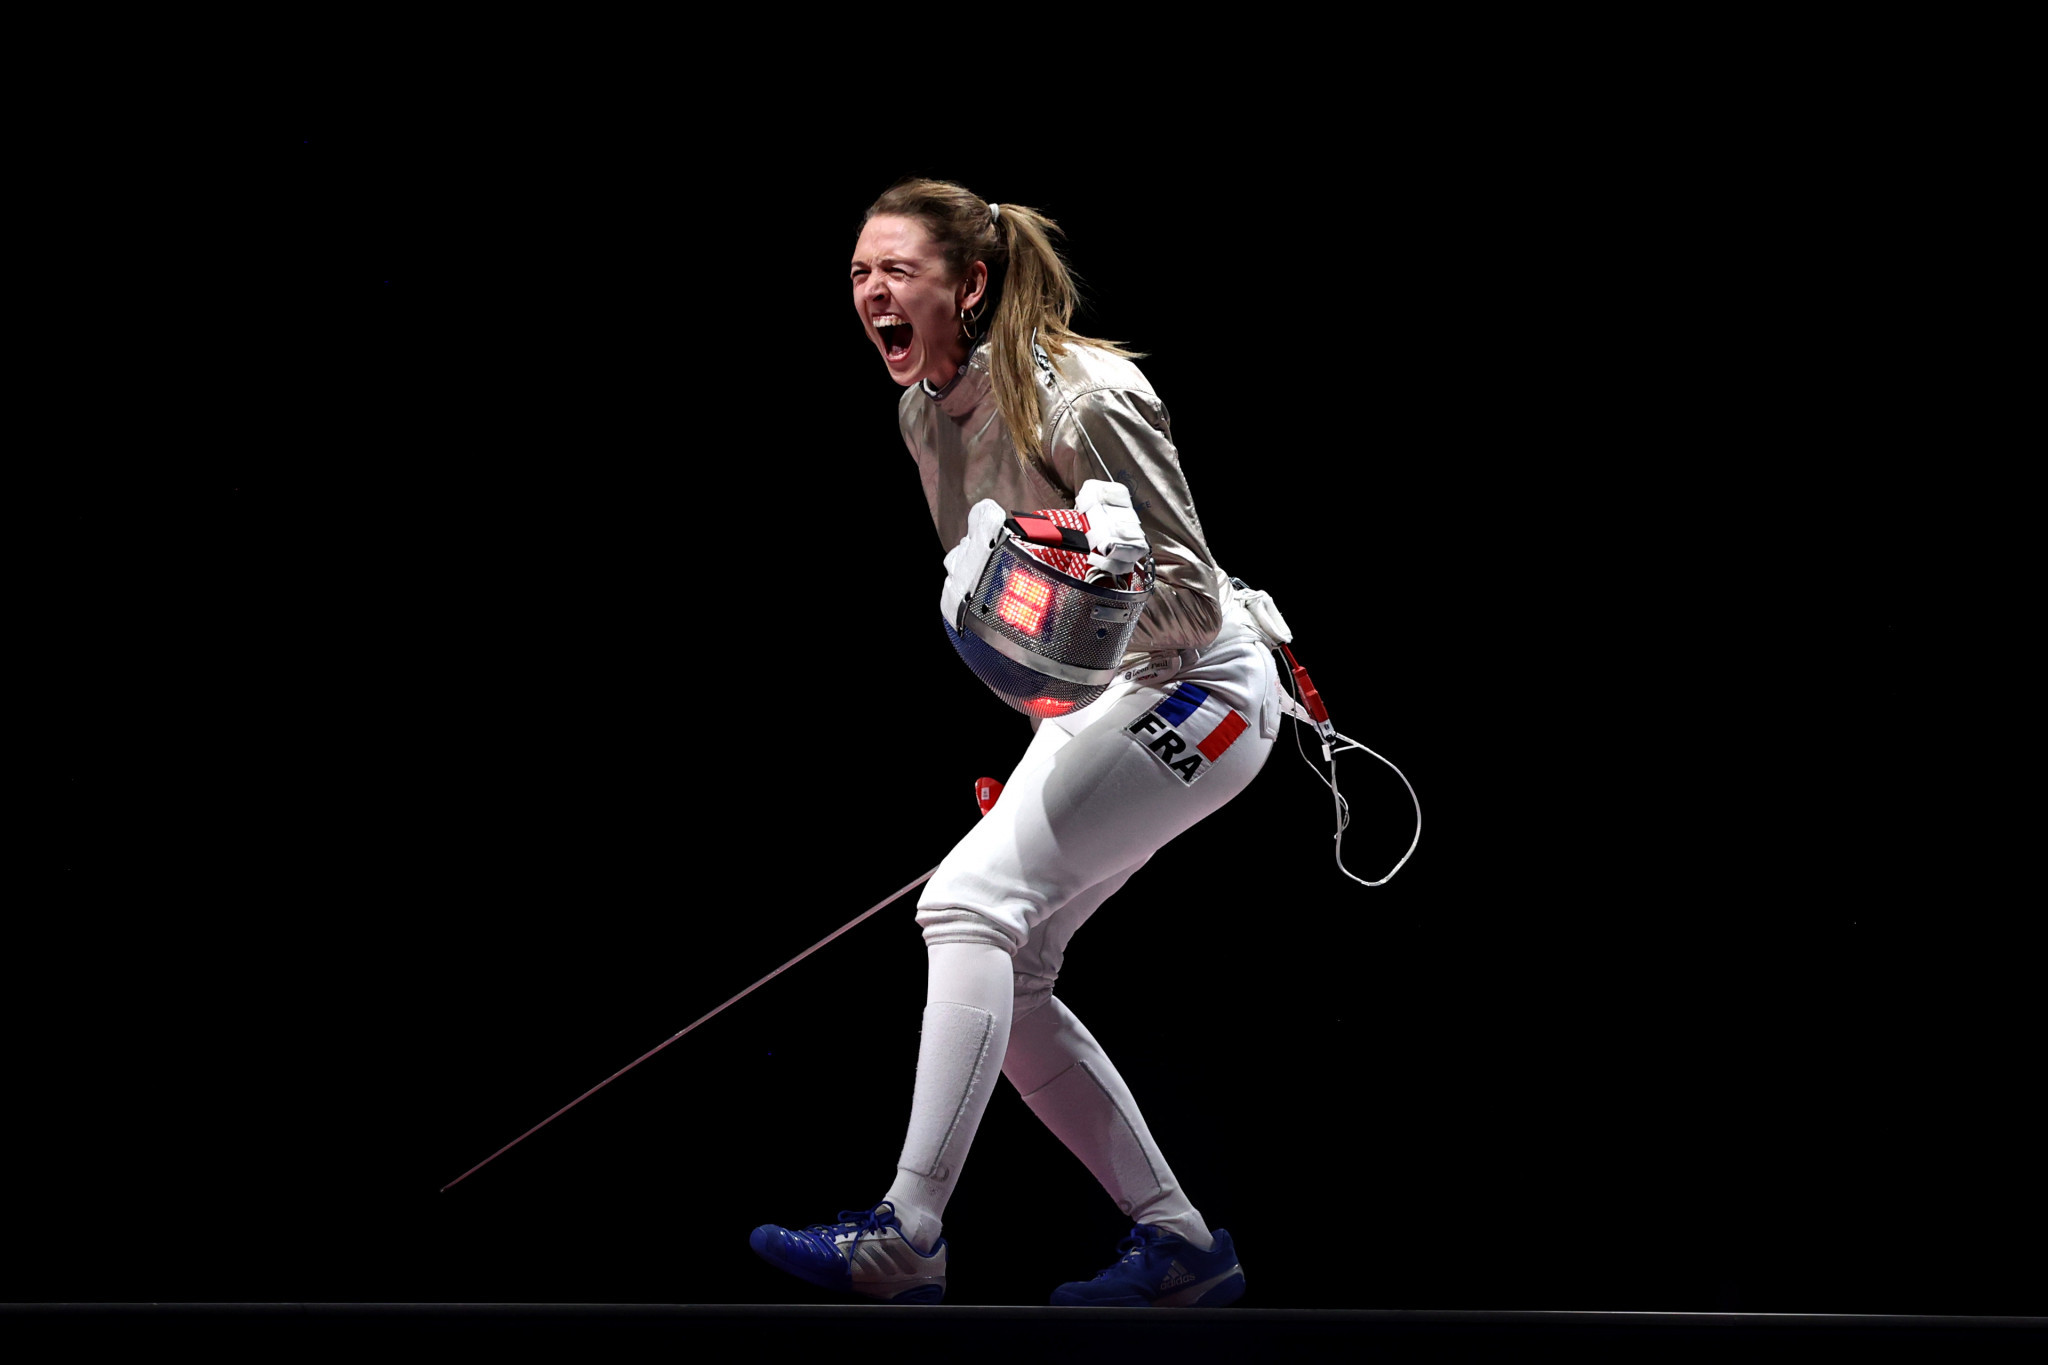 Manon Apithy-Brunet secured the first major individual gold of her career on the final day of the European Fencing Championships ©Getty Images